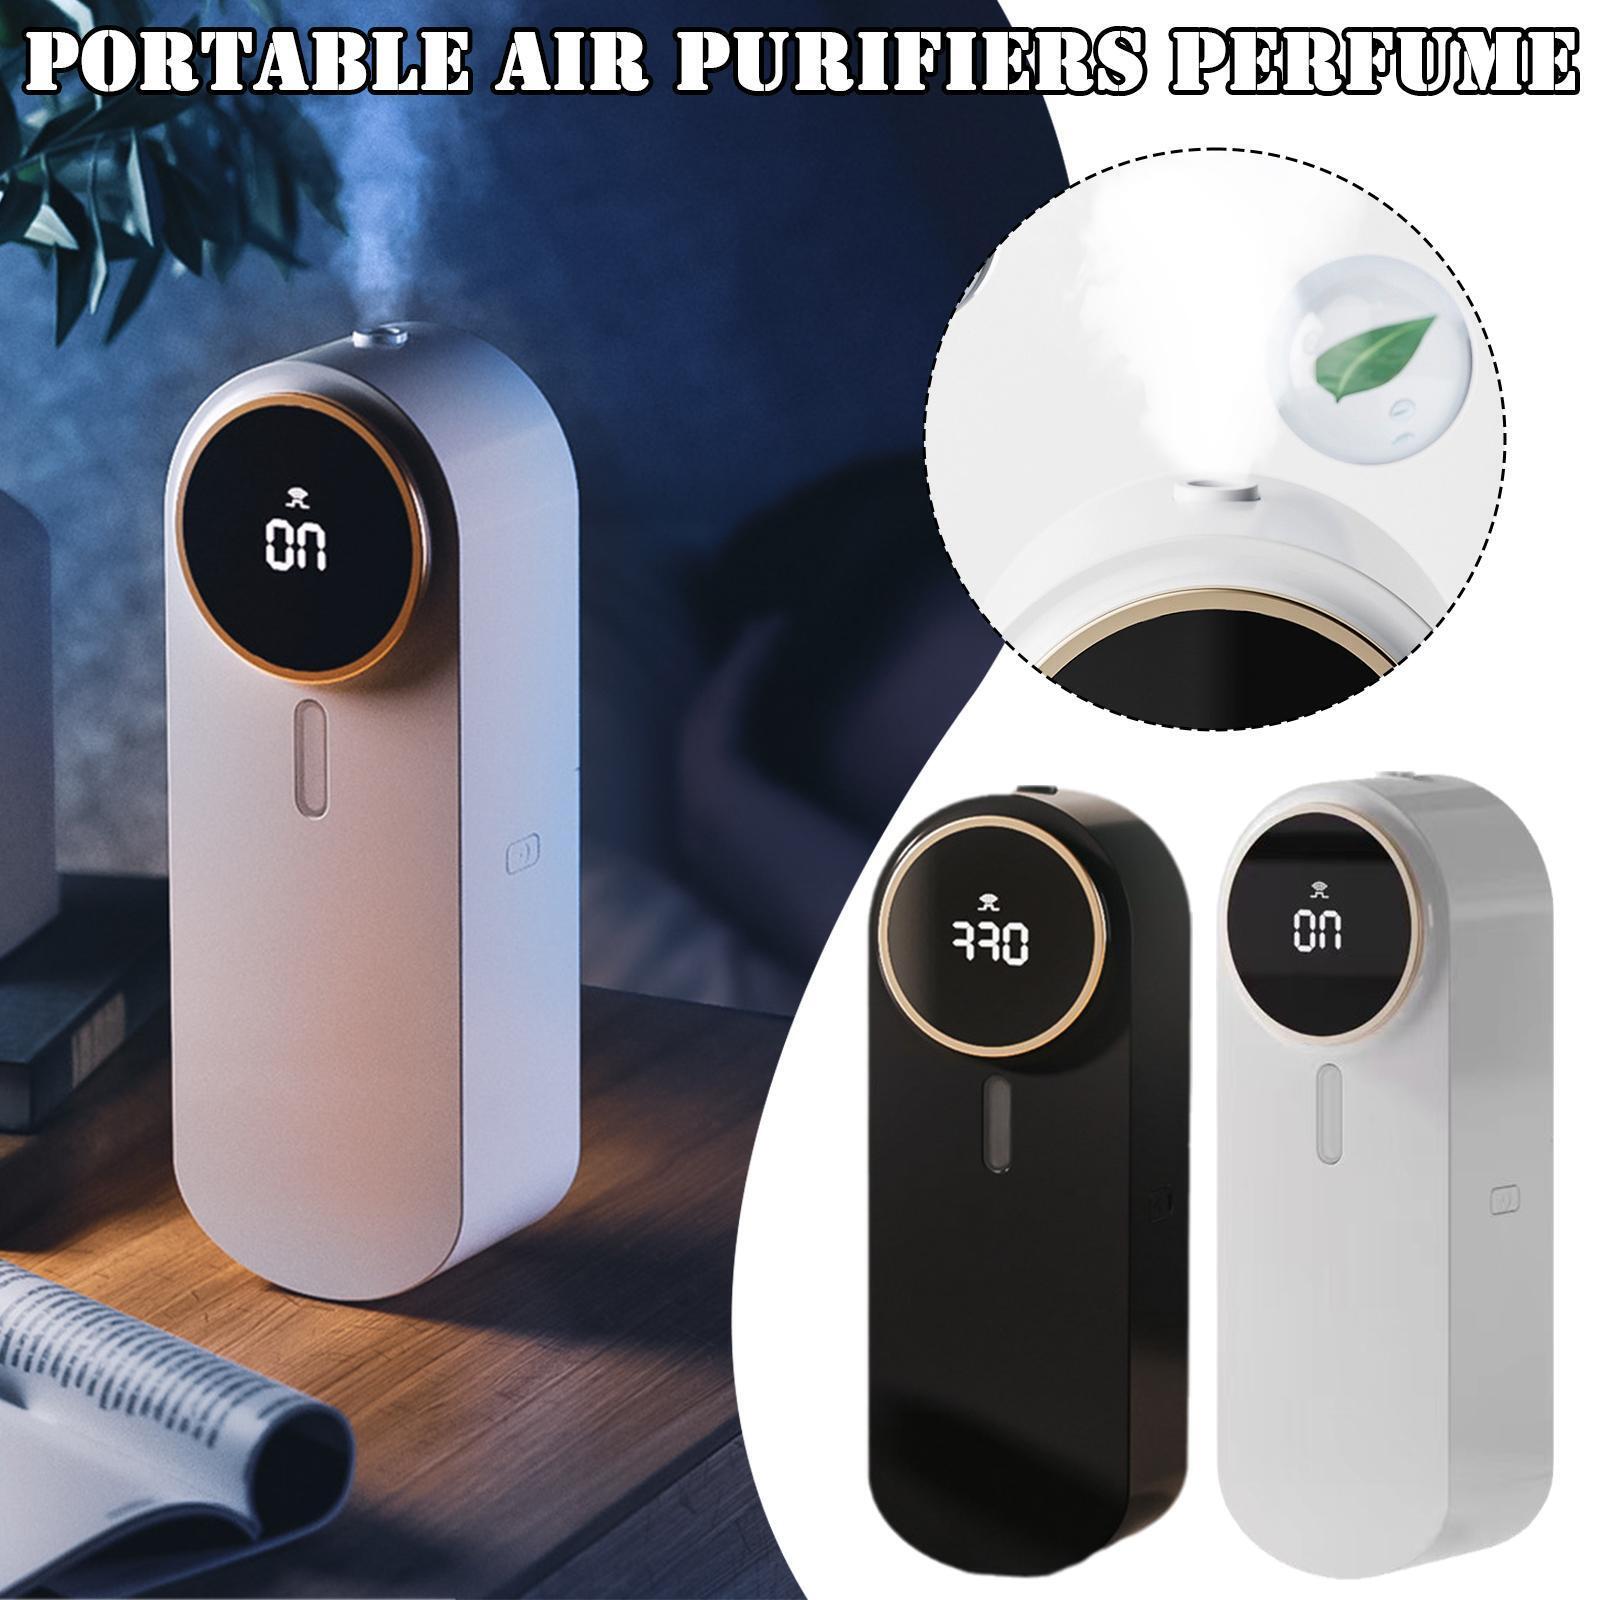 Air Purifiers For Bedroom Home, R Cleaner With Fragrance For Be Sponge J5x3